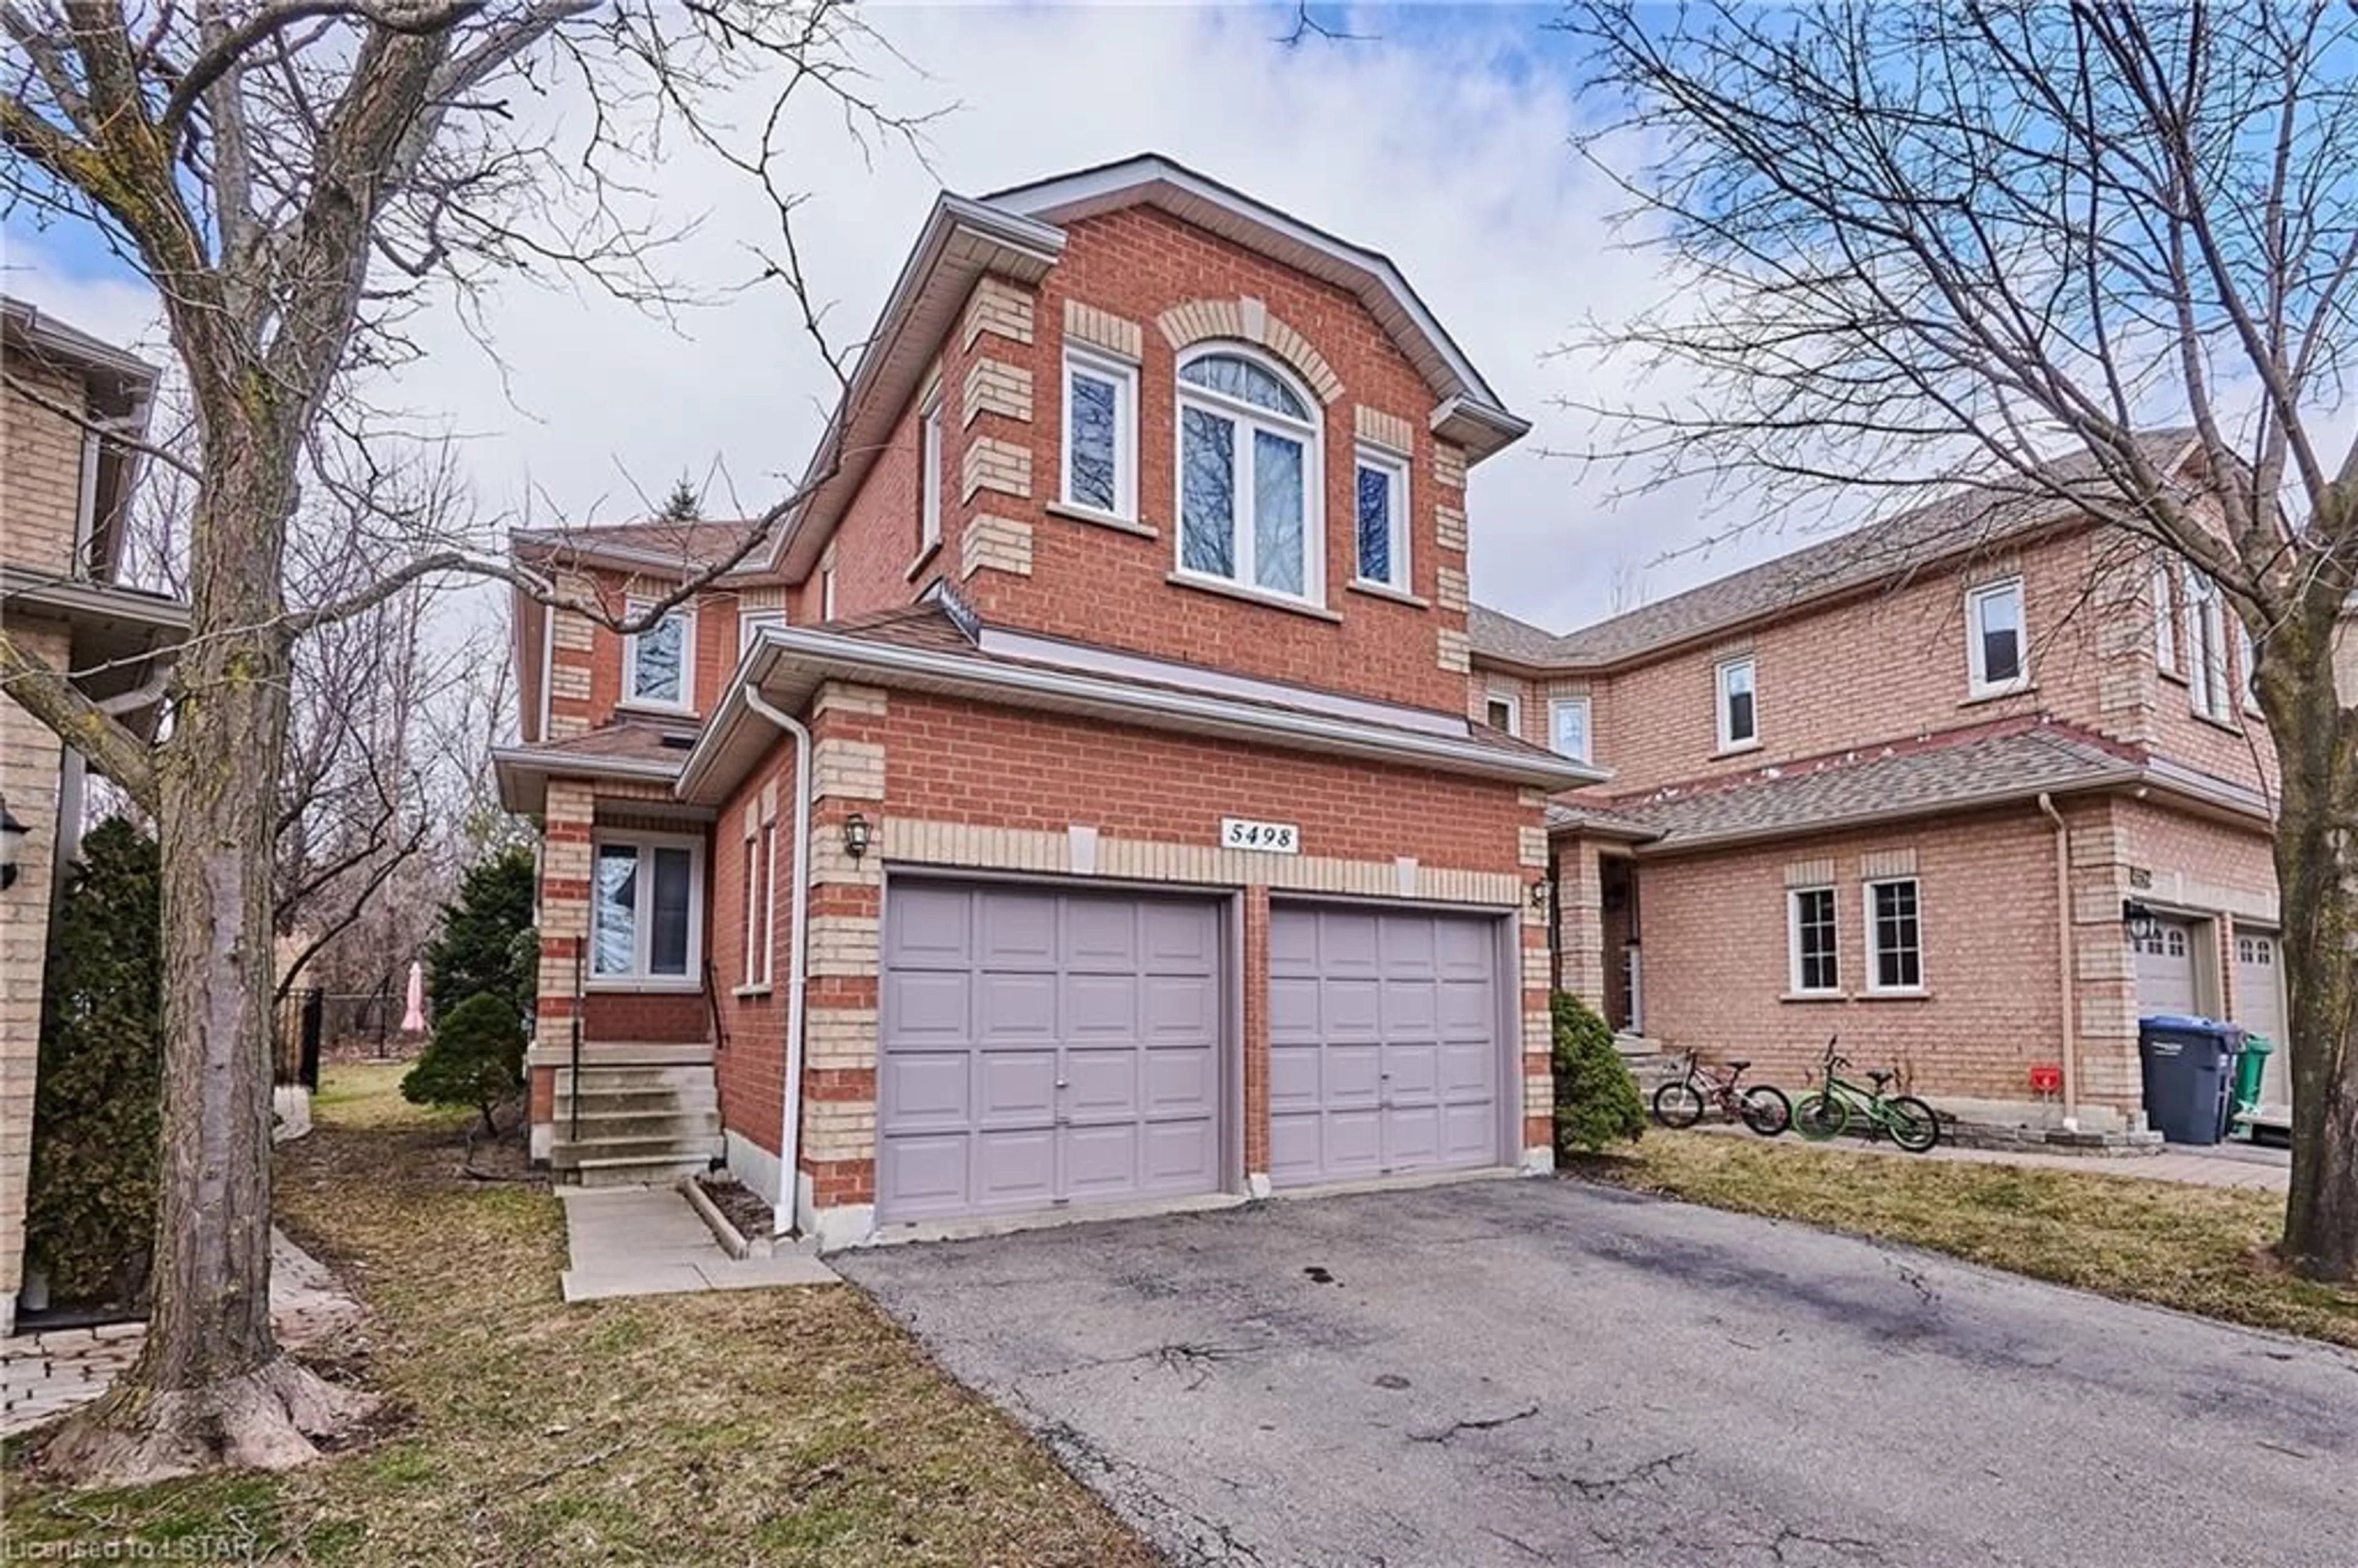 Home with brick exterior material for 5498 Red Brush Dr, Mississauga Ontario L4Z 4A7